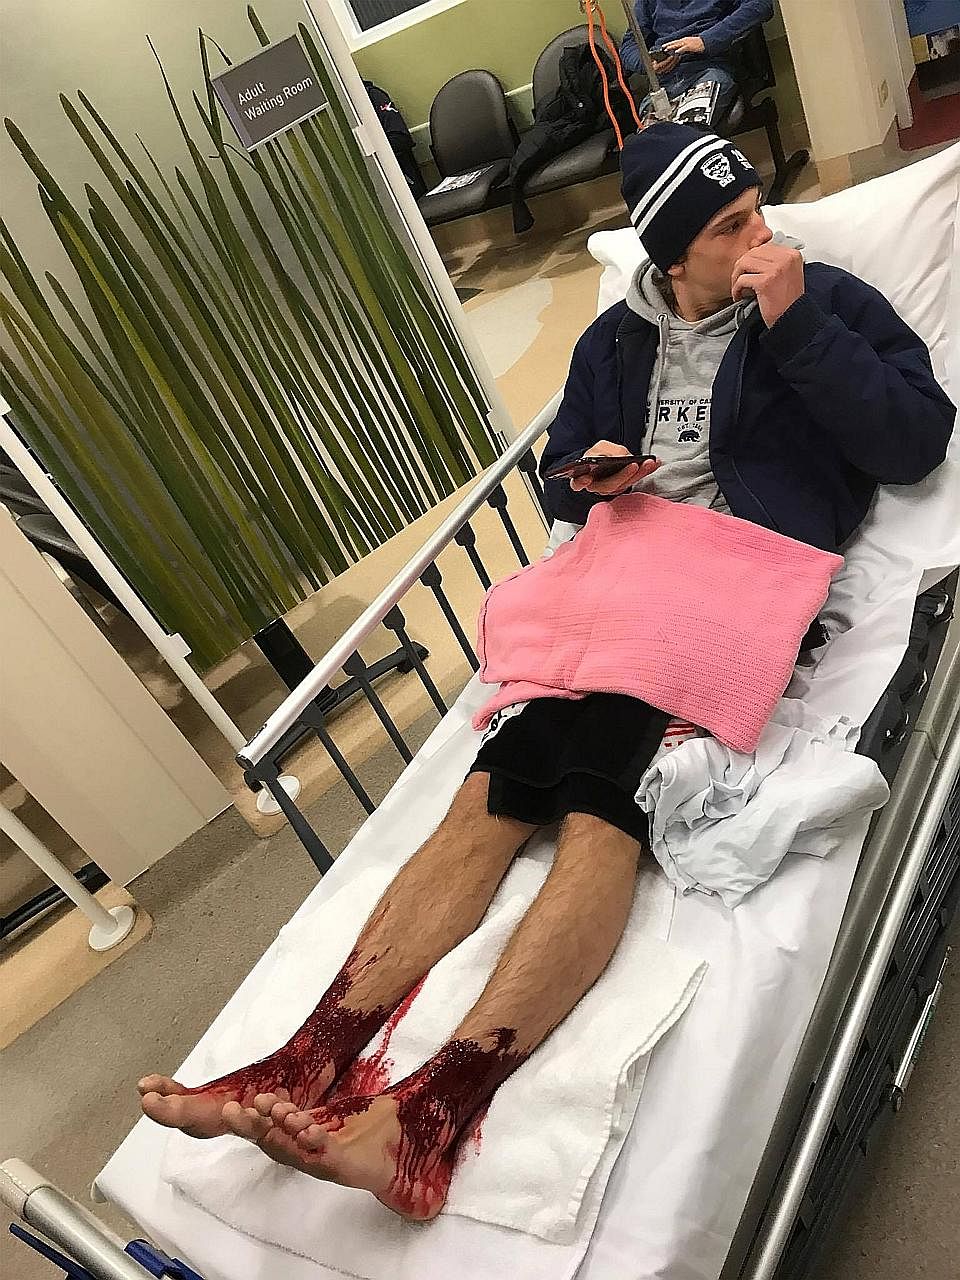 Sam Kanizay waiting in a Melbourne hospital on Saturday evening. He had waded waist-deep into the water at Brighton Beach and emerged after 30 minutes, bleeding profusely from the calves down.